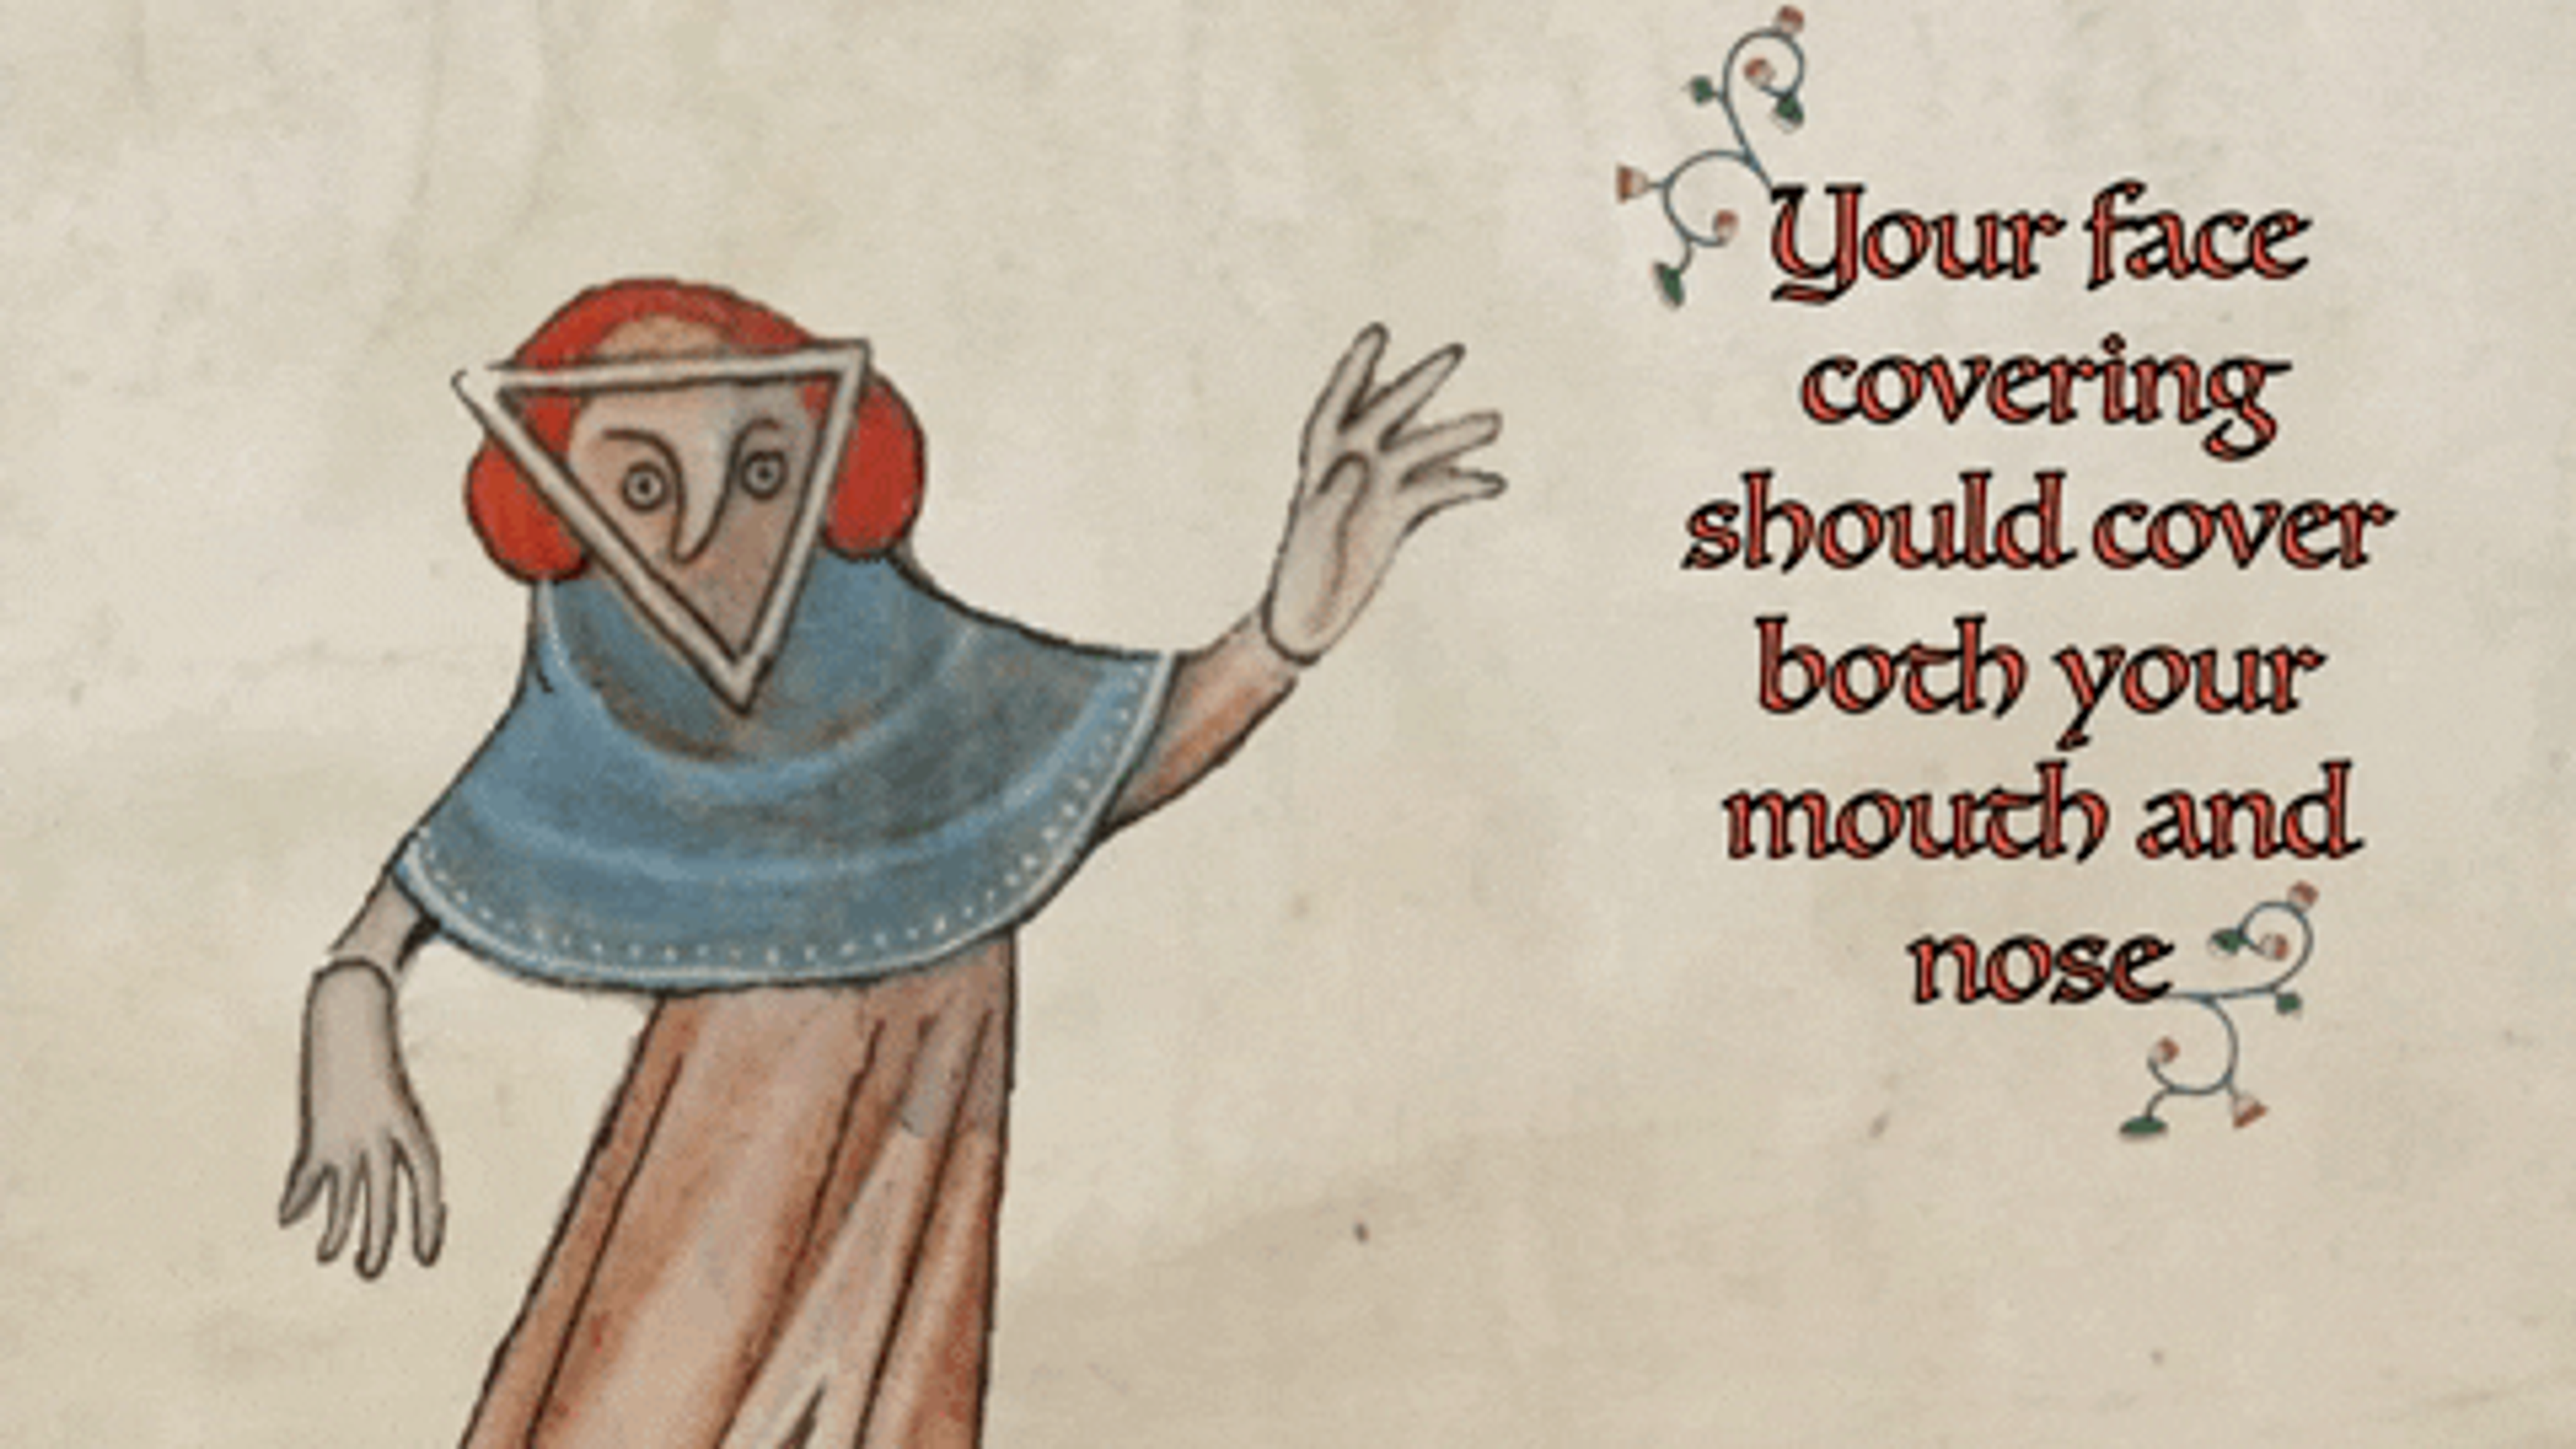 An animated medieval drawing of a woman wearing a face covering